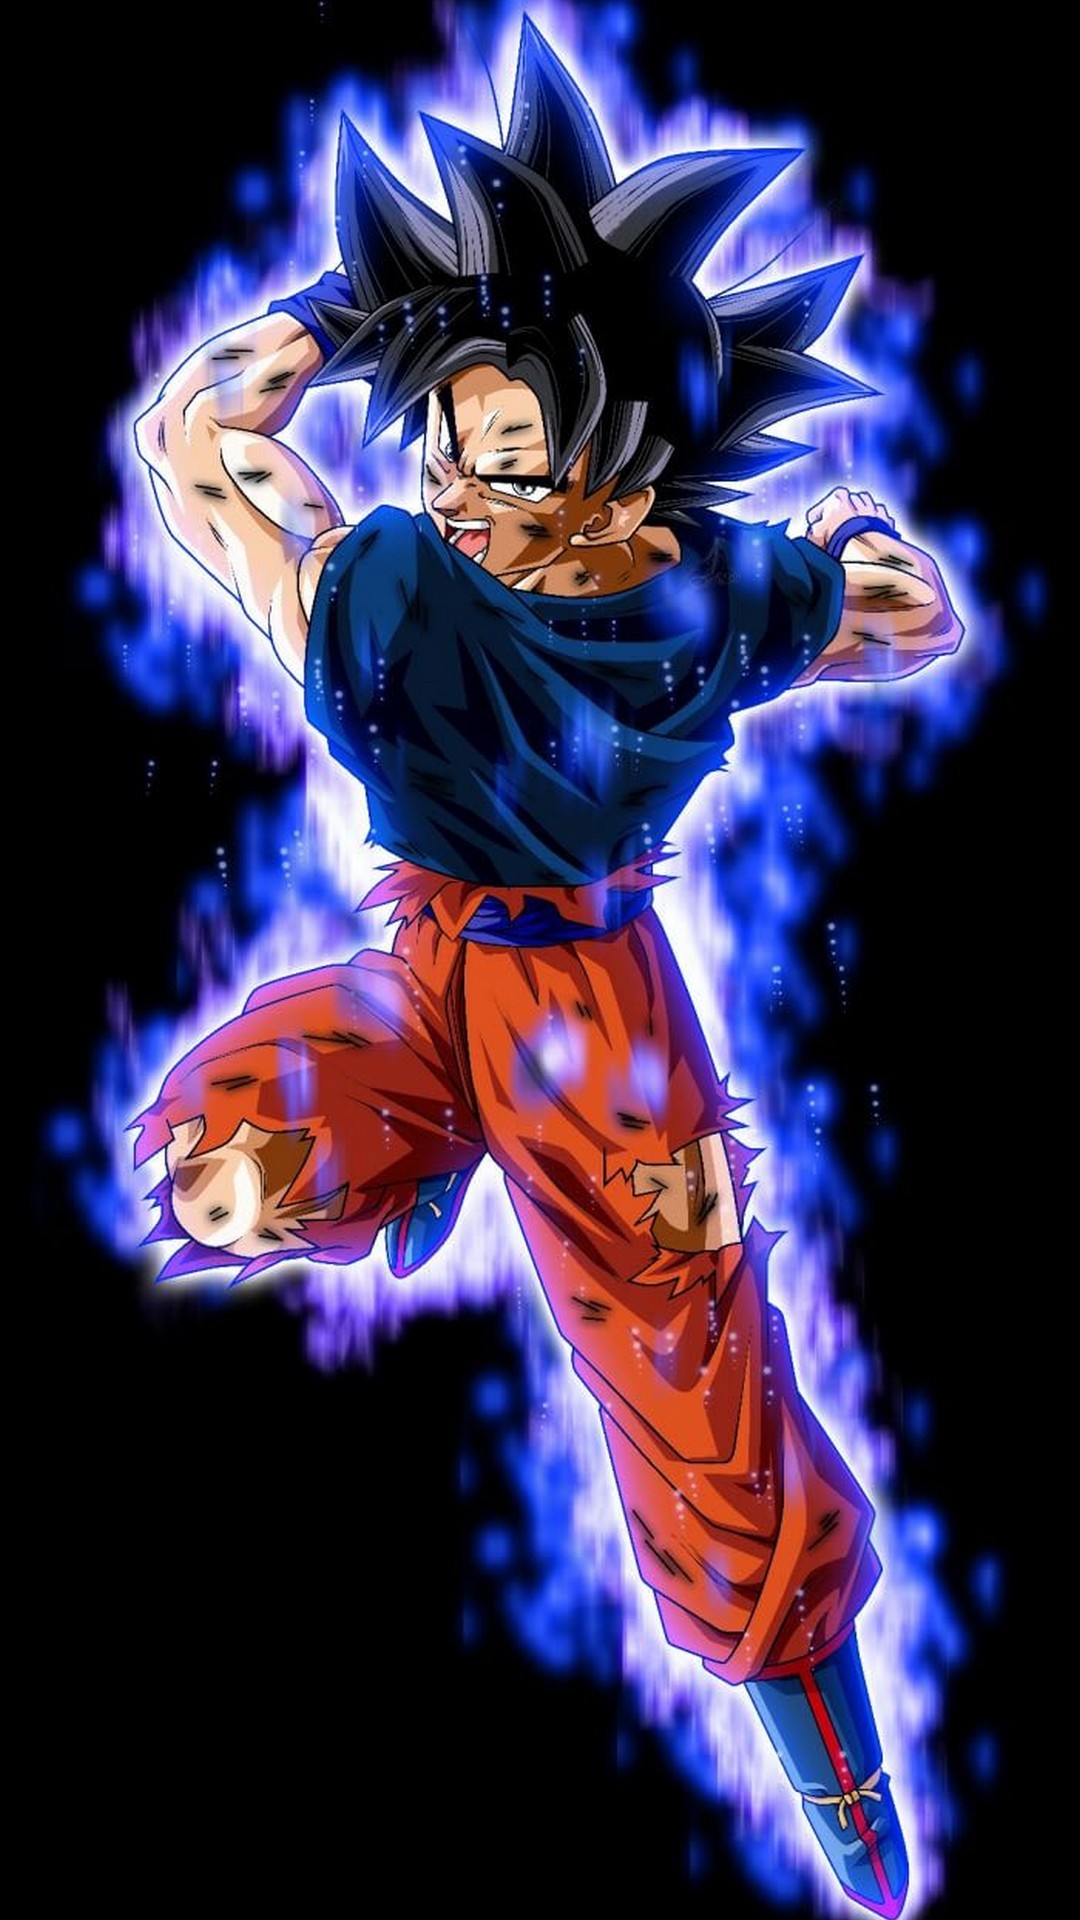 Goku Imagenes Wallpaper iPhone with image resolution 1080x1920 pixel. You can make this wallpaper for your iPhone 5, 6, 7, 8, X backgrounds, Mobile Screensaver, or iPad Lock Screen